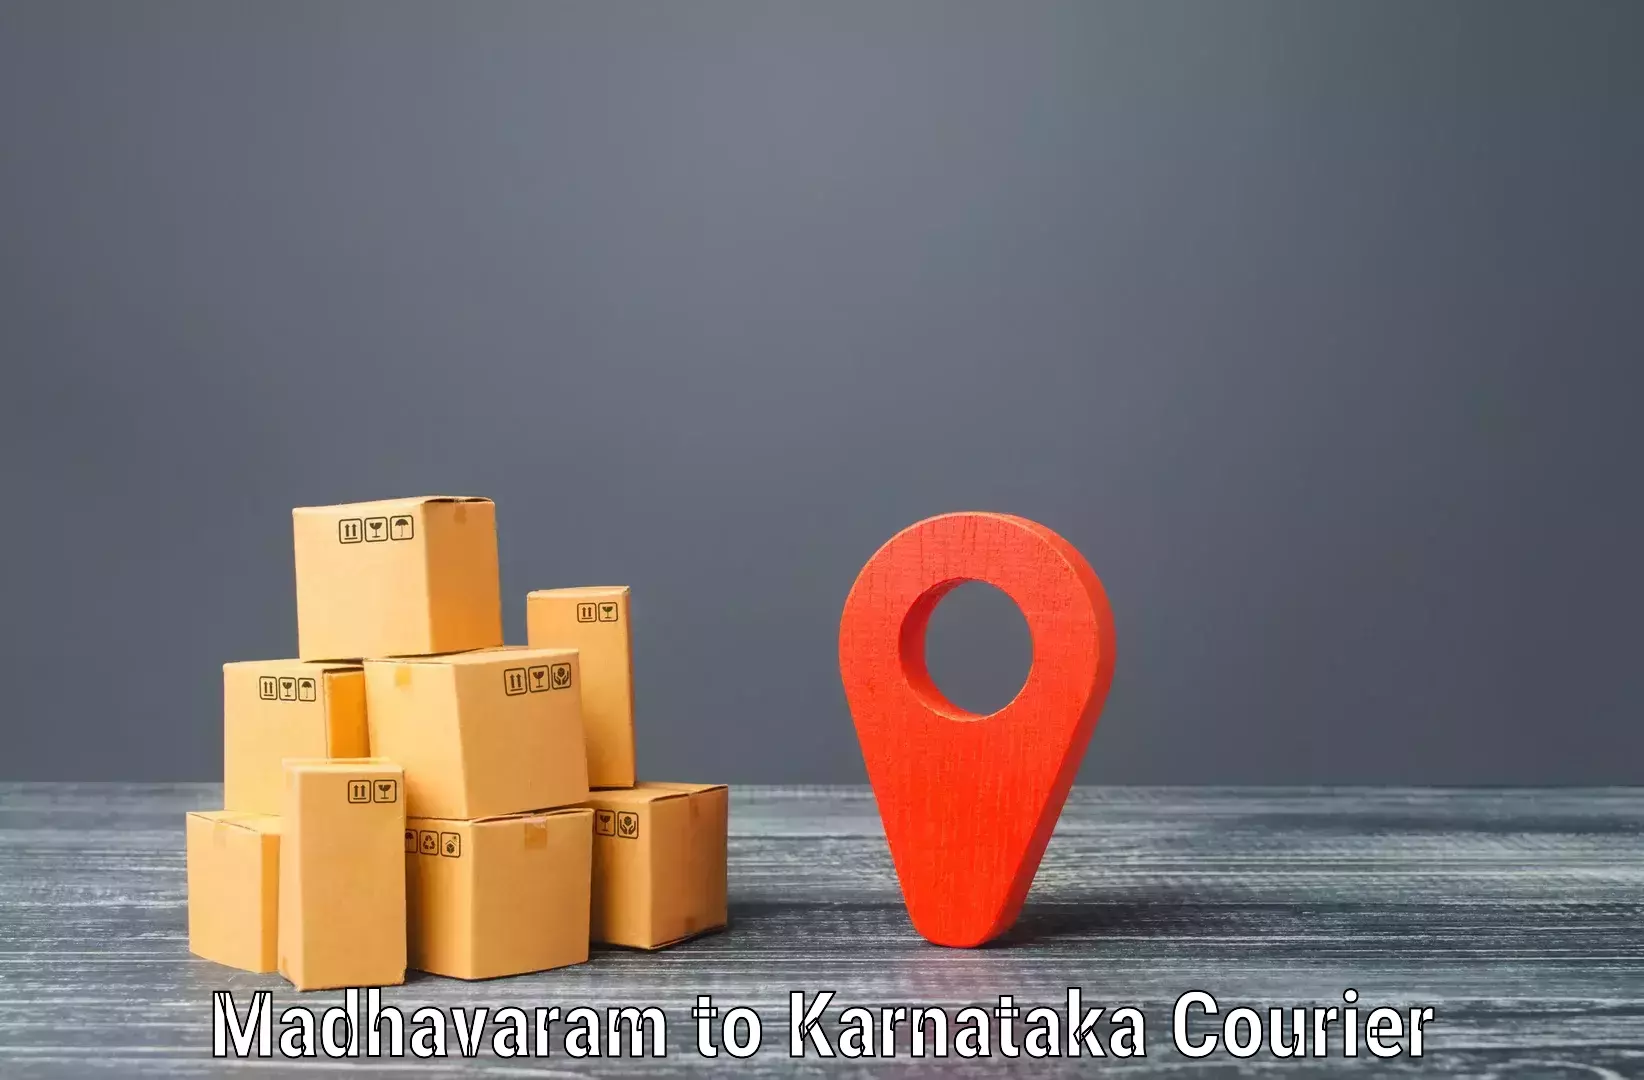 State-of-the-art courier technology Madhavaram to Manvi